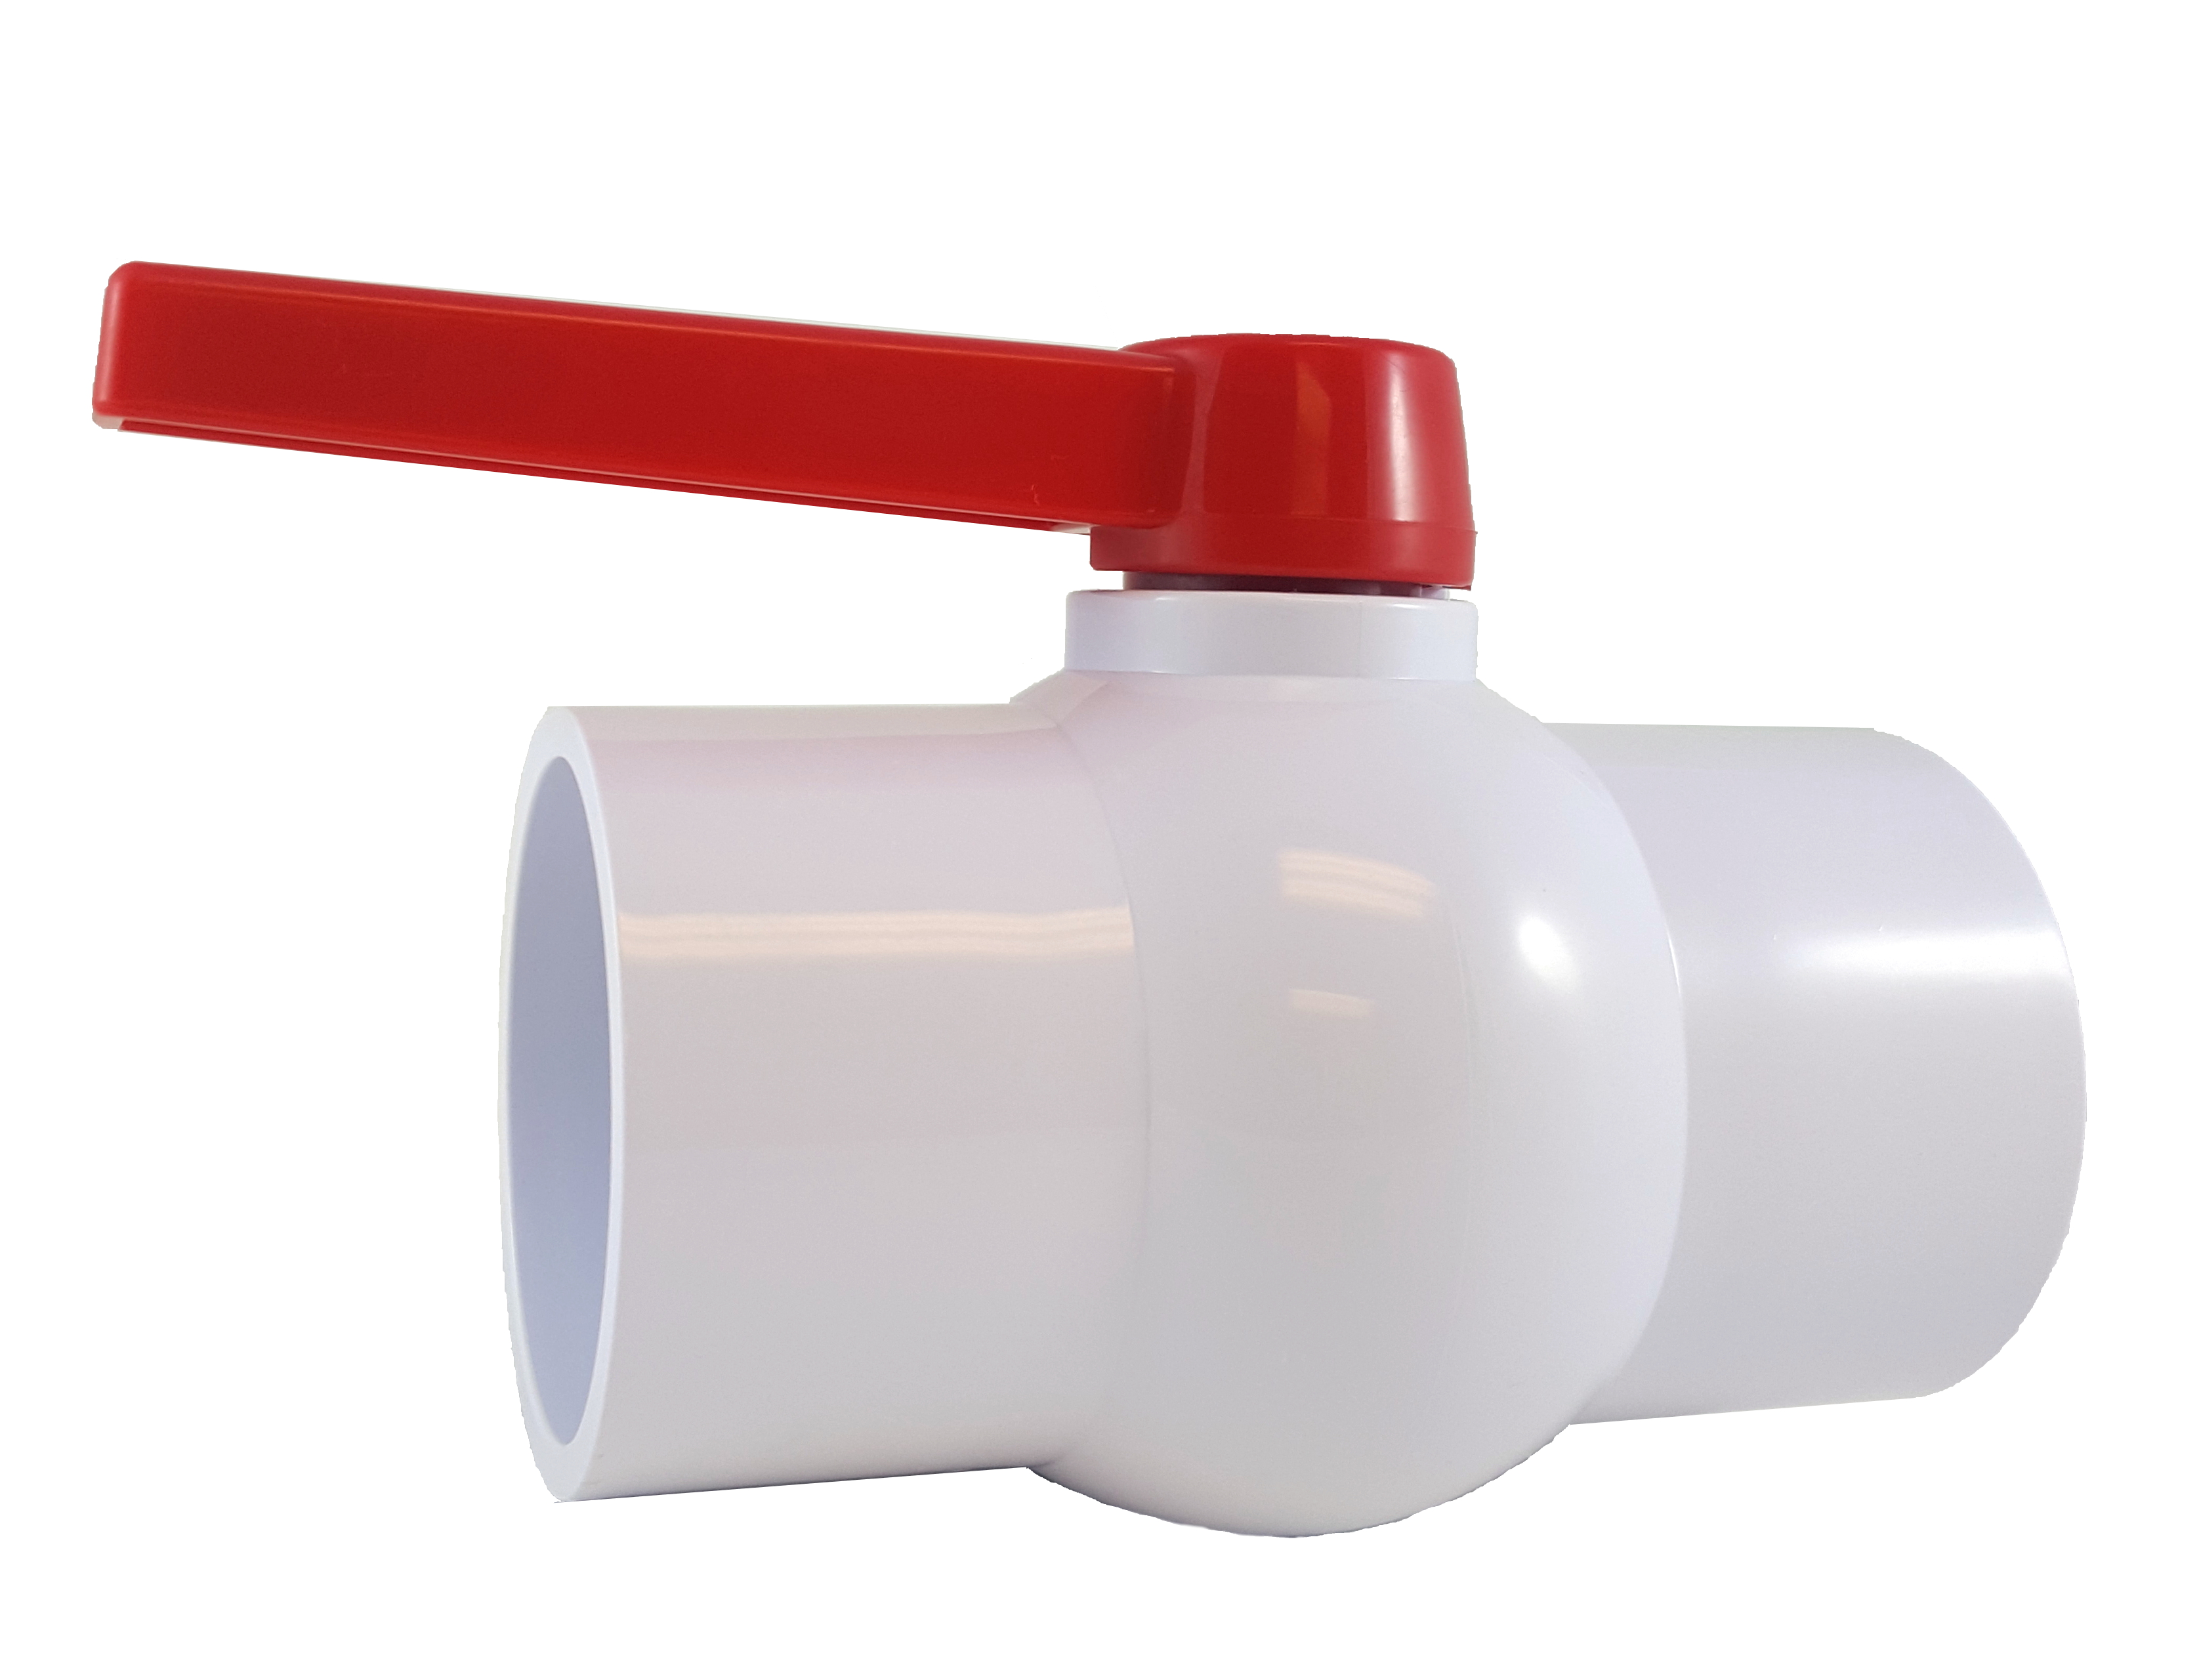 PVC COMPACT BALL VALVE 3" - Socket - Sanipro - (Pack of 2) - image 1 of 3